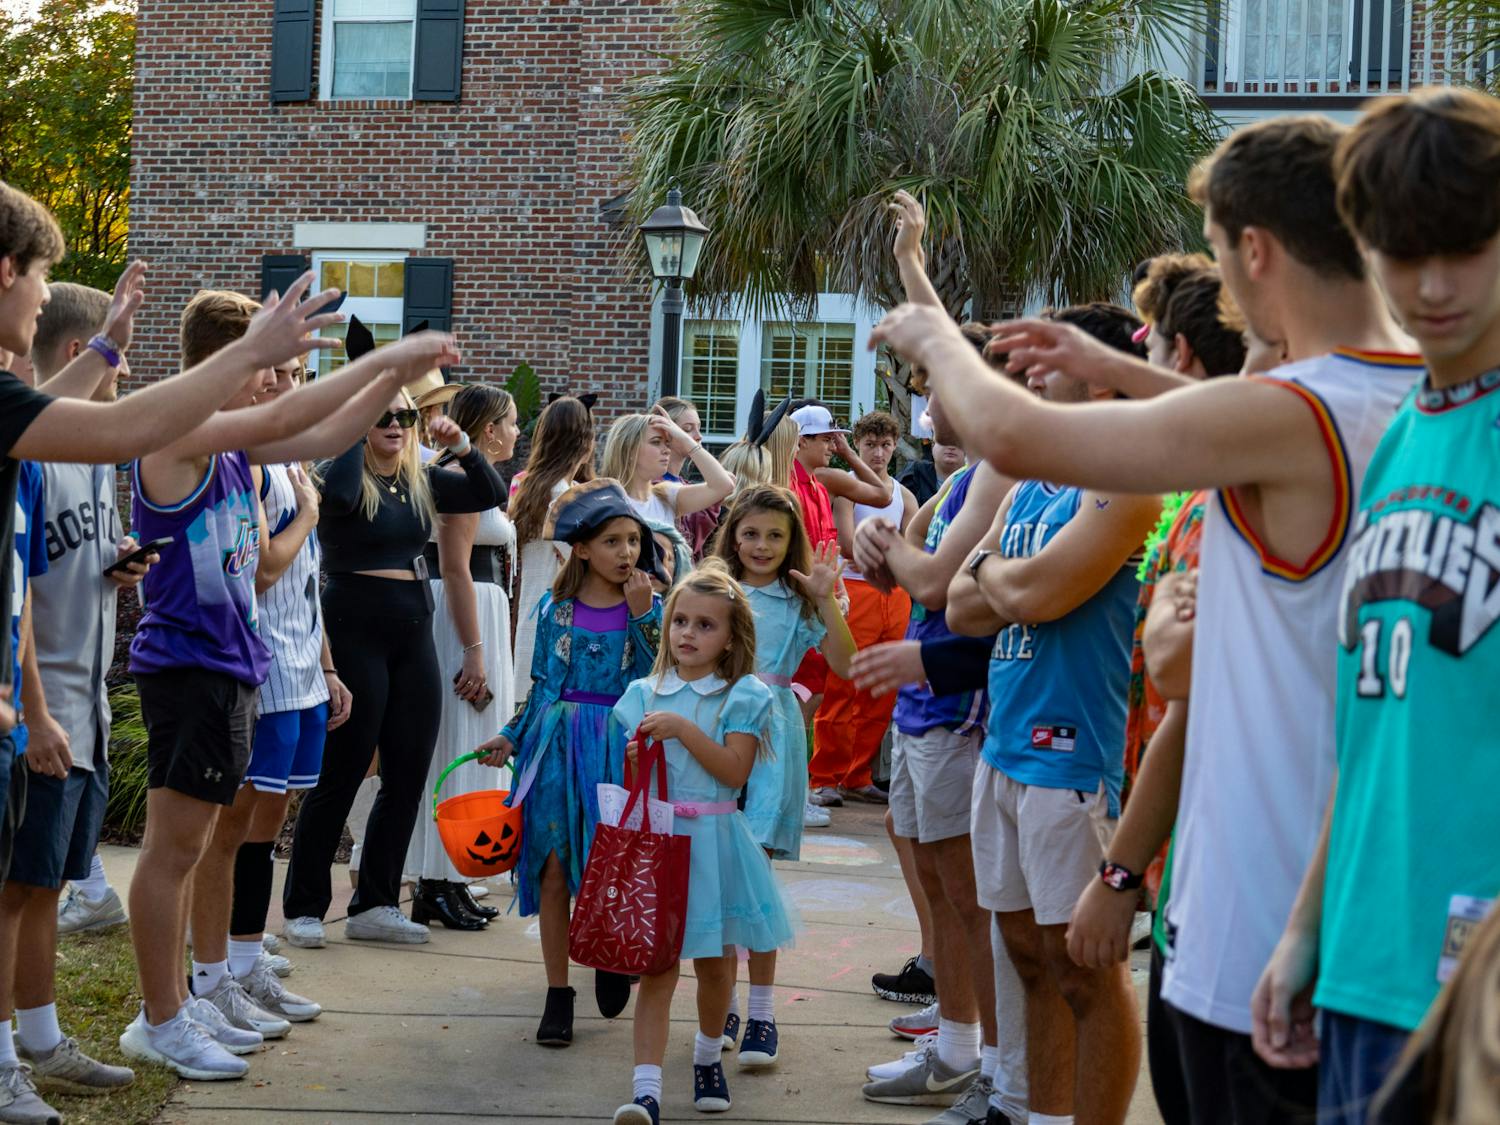 USC fraternity members salute a group of young trick or treaters as they walk down a pathway in USC's Greek Village on Oct. 25, 2022. USC fraternities and sororities celebrated Halloween with community members during their community outreach event.